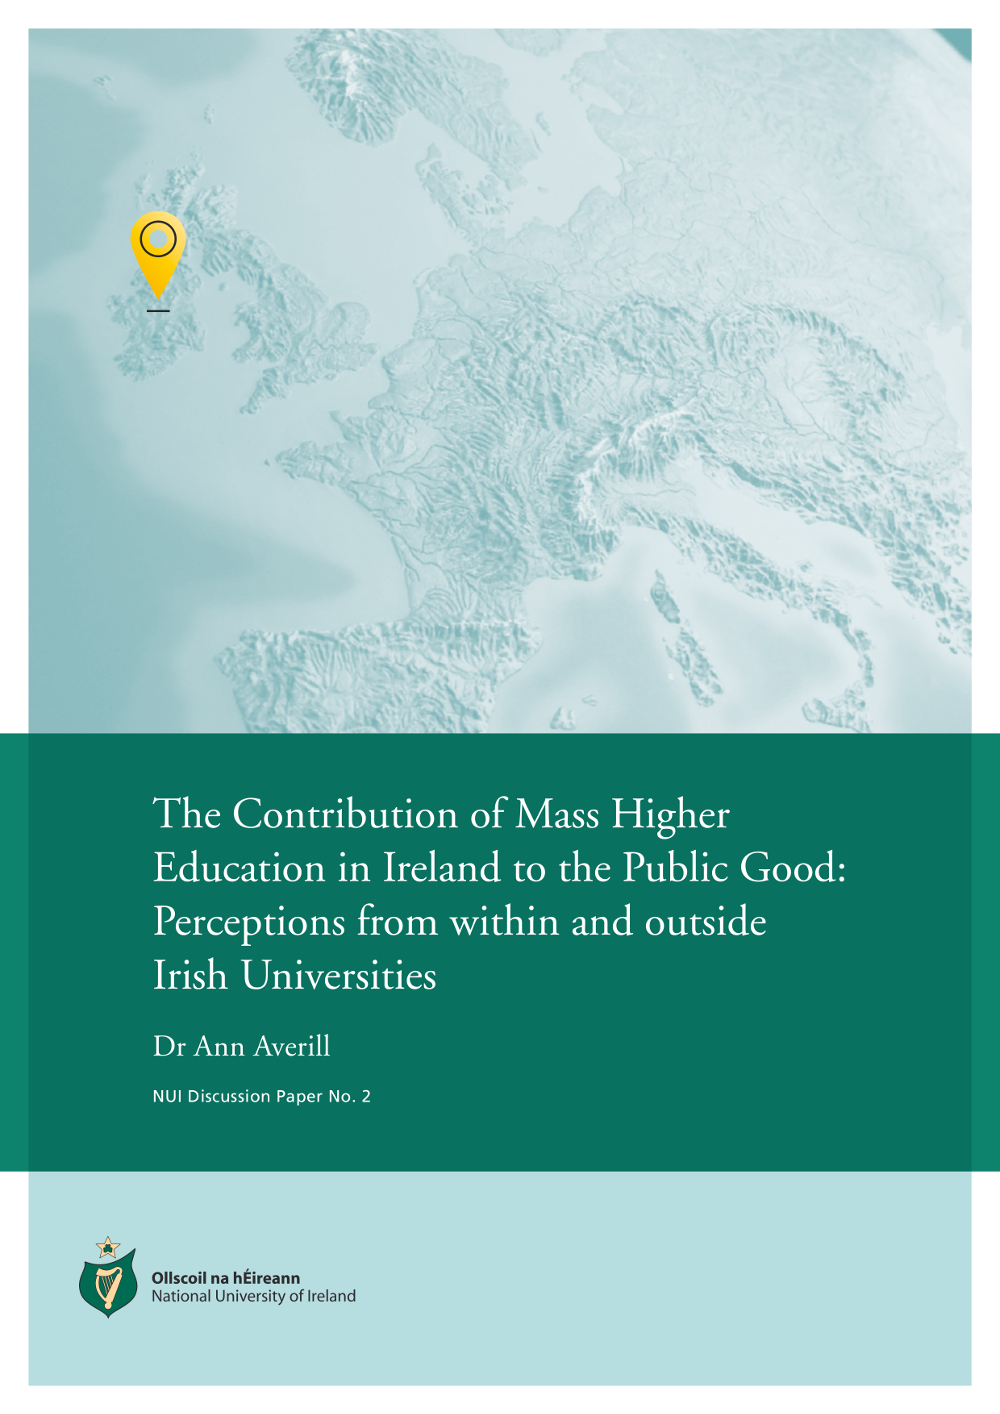 The Contribution of Mass Higher Education in Ireland to Public Good: Perceptions from within and outside Irish Universities 